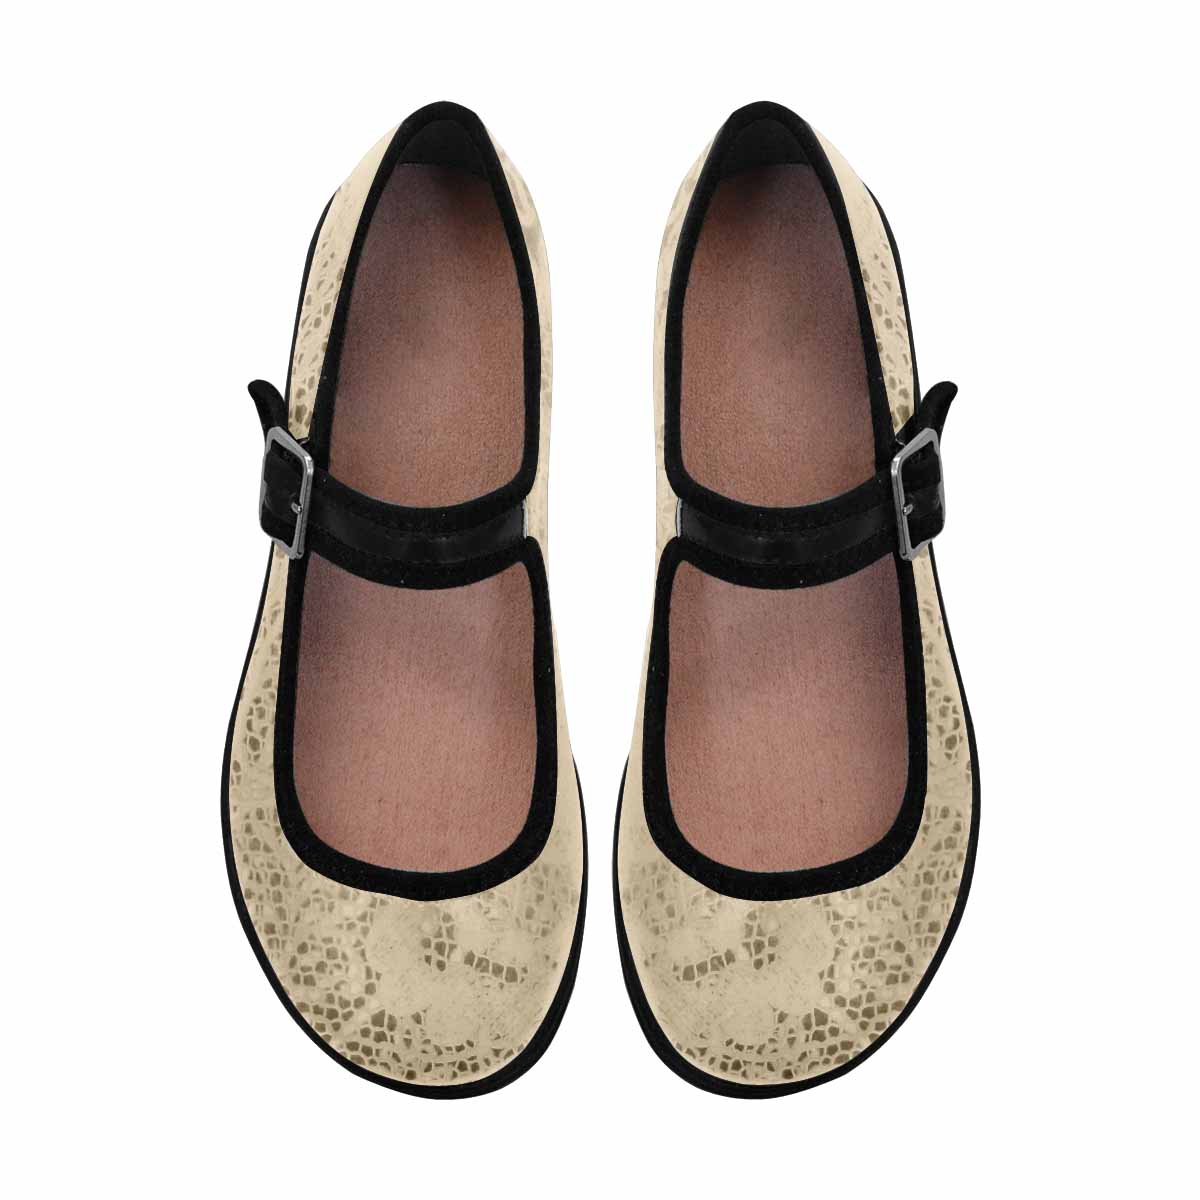 Victorian lace print, cute, vintage style women's Mary Jane shoes, design 26